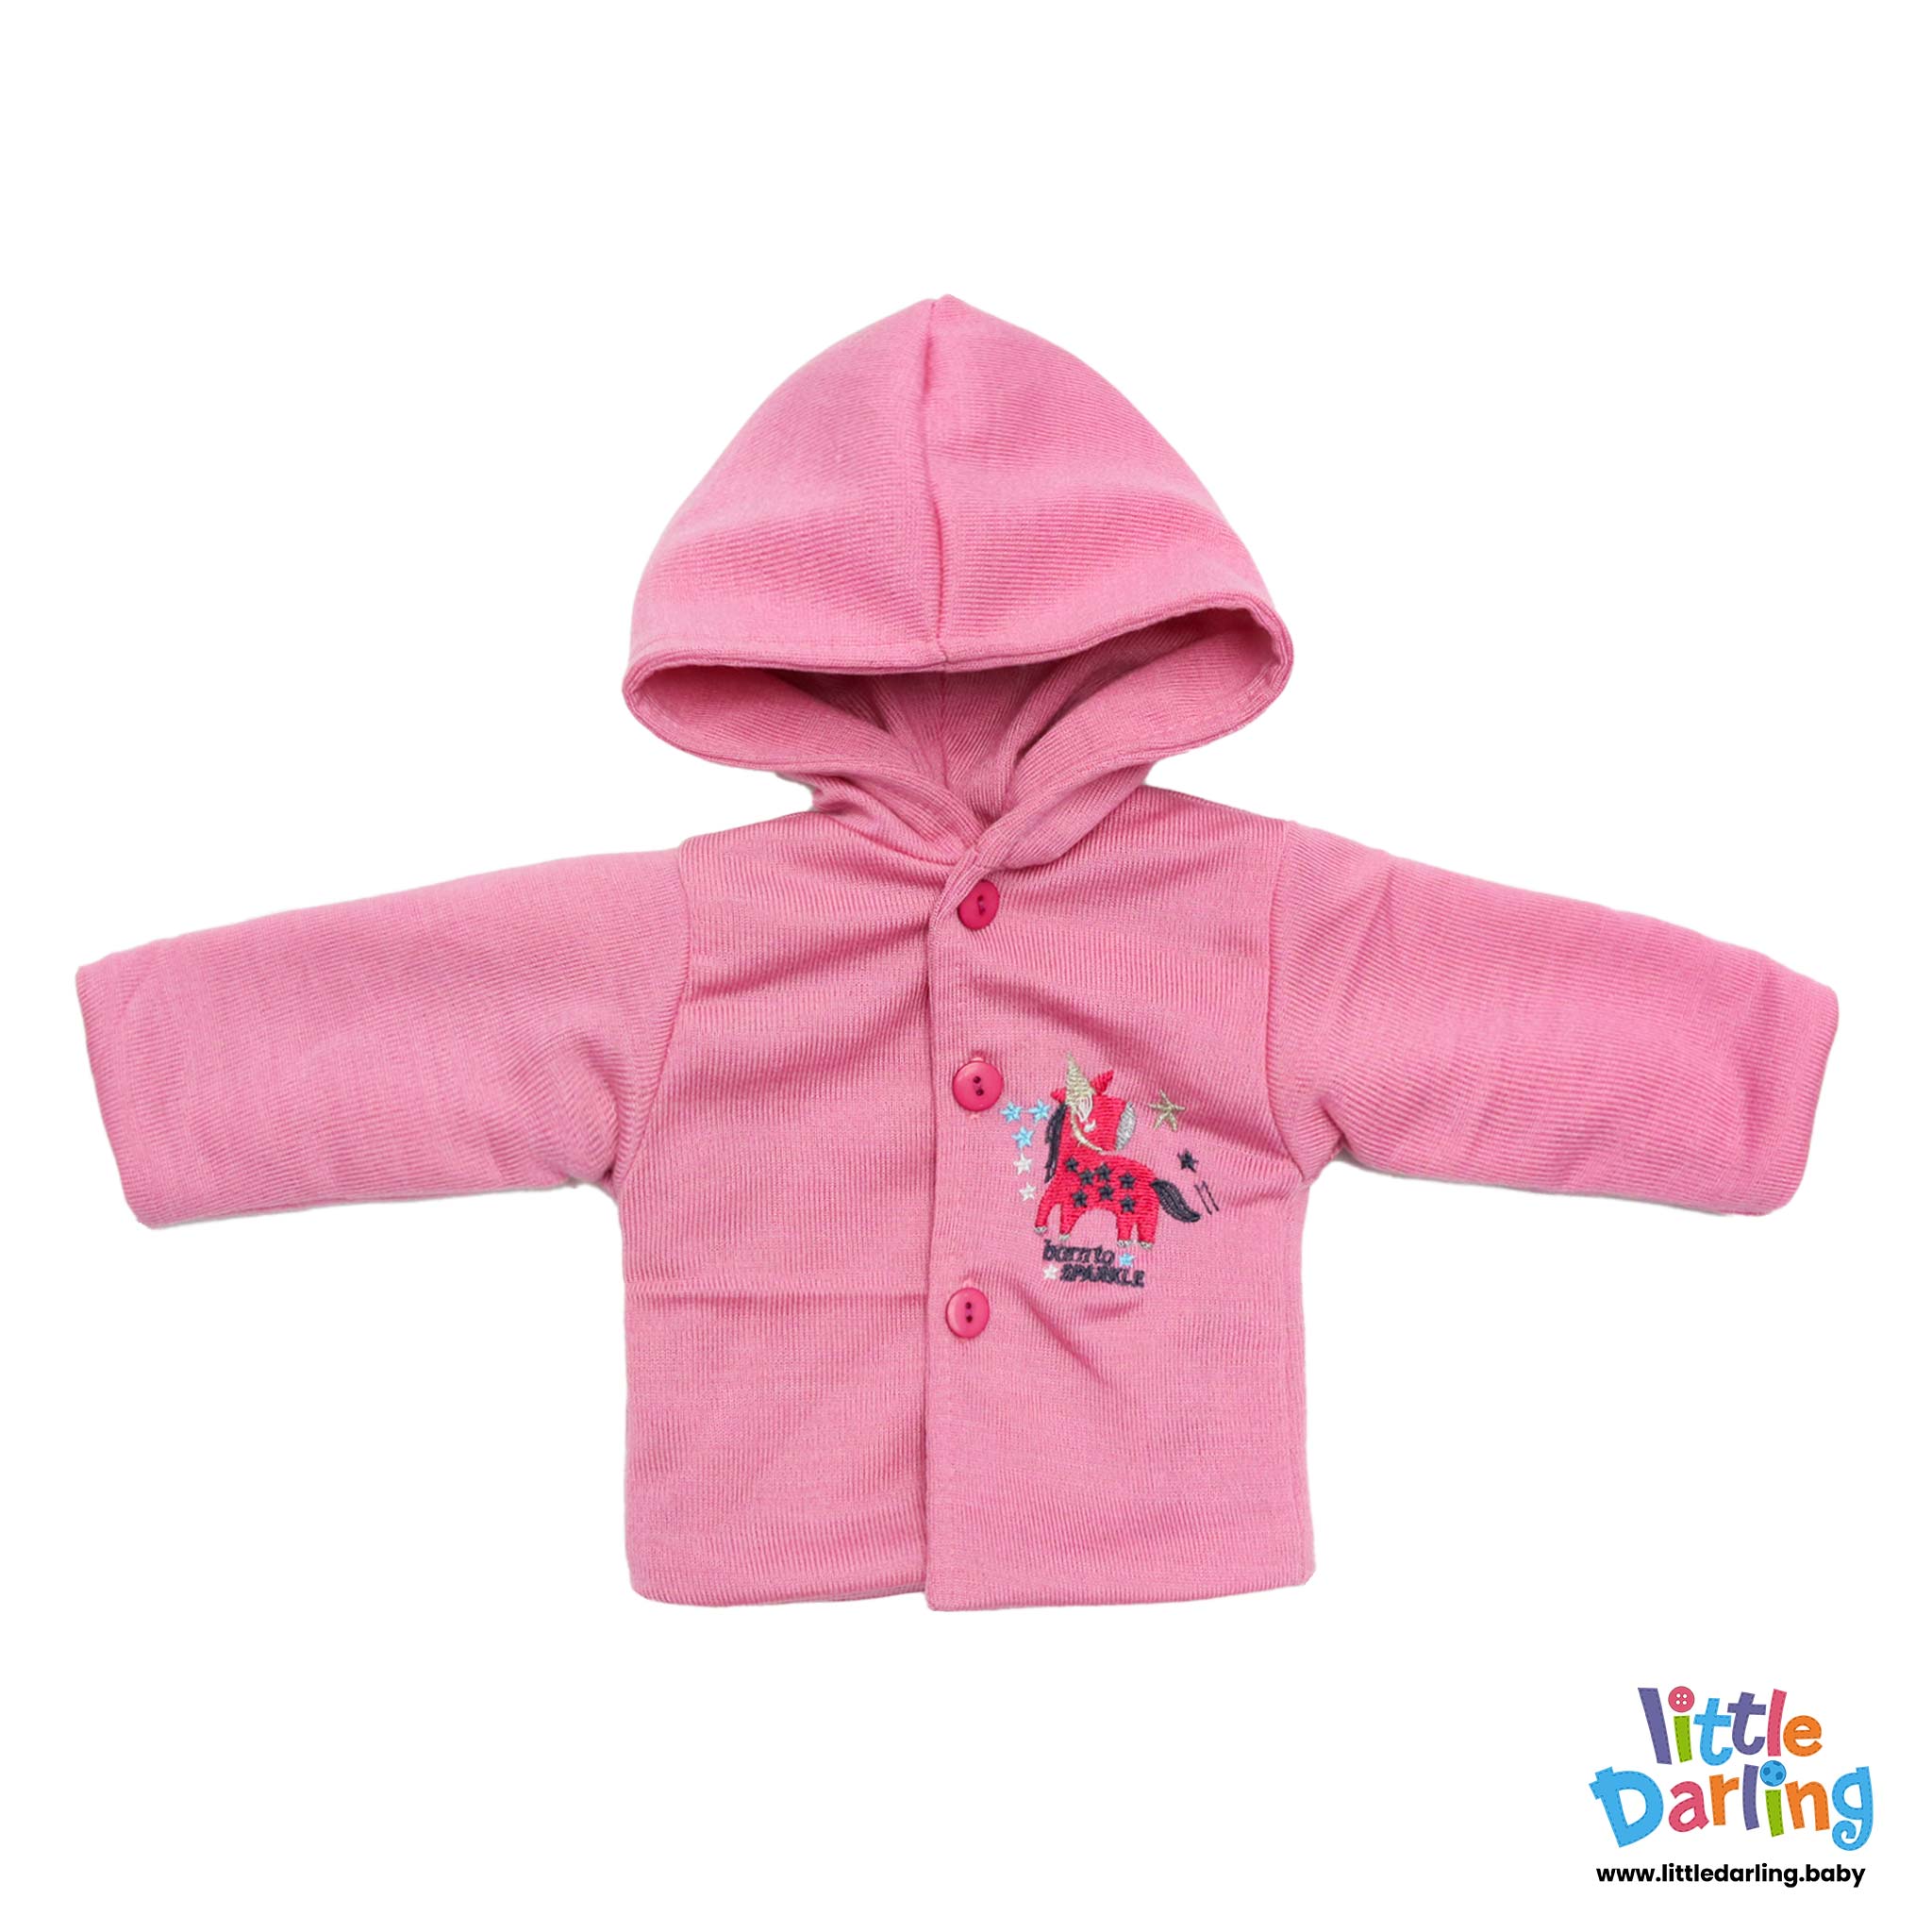 Hooded Jacket Unicorn Embroidery Pink Color by Little Darling